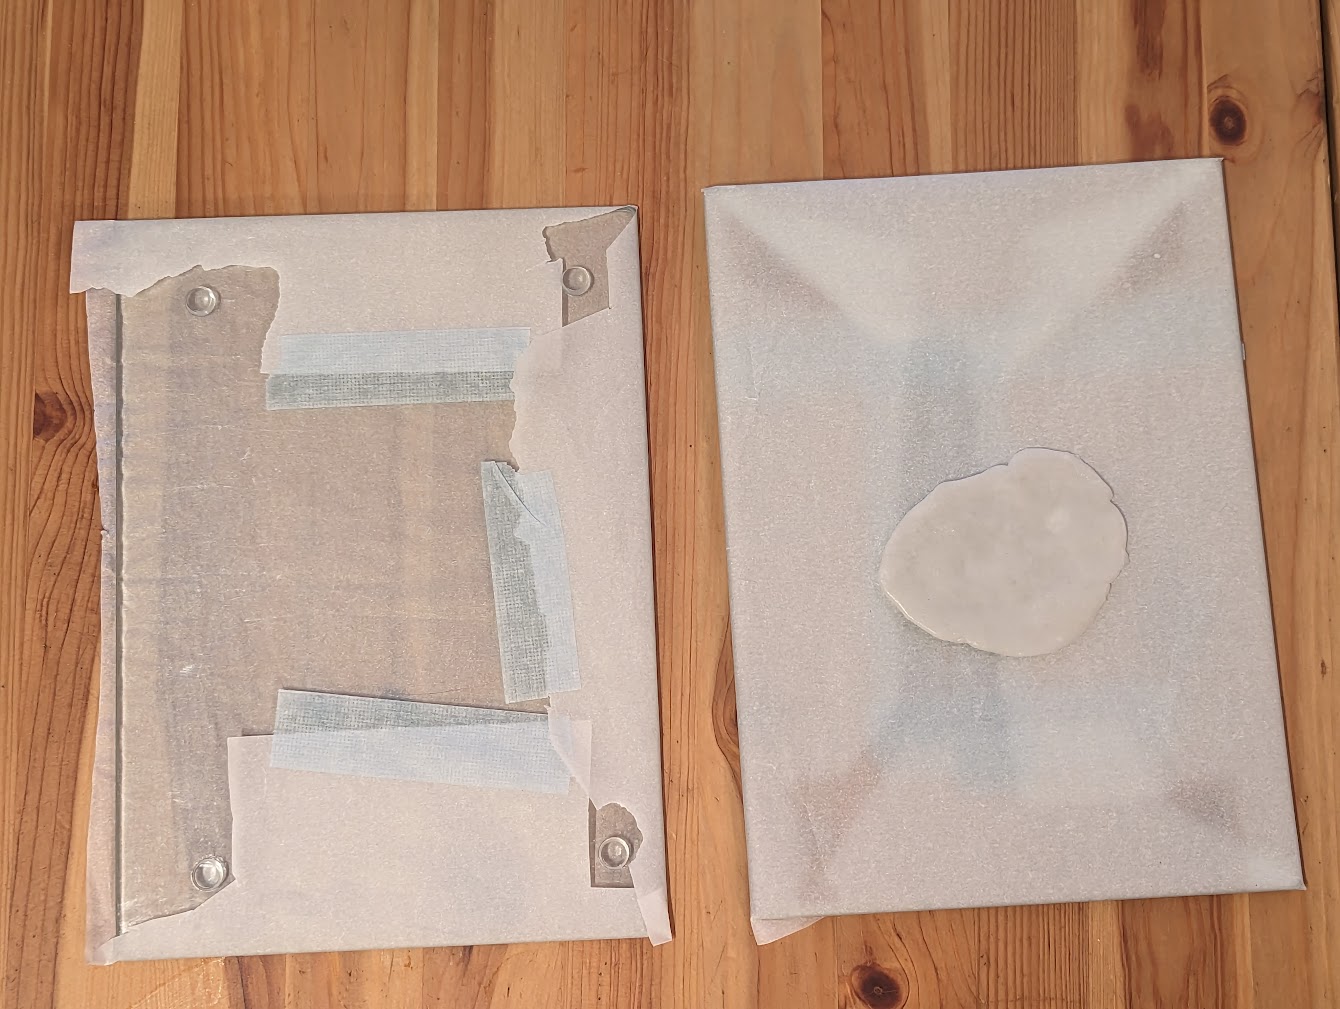 squishing PCL plastic between two glass plates